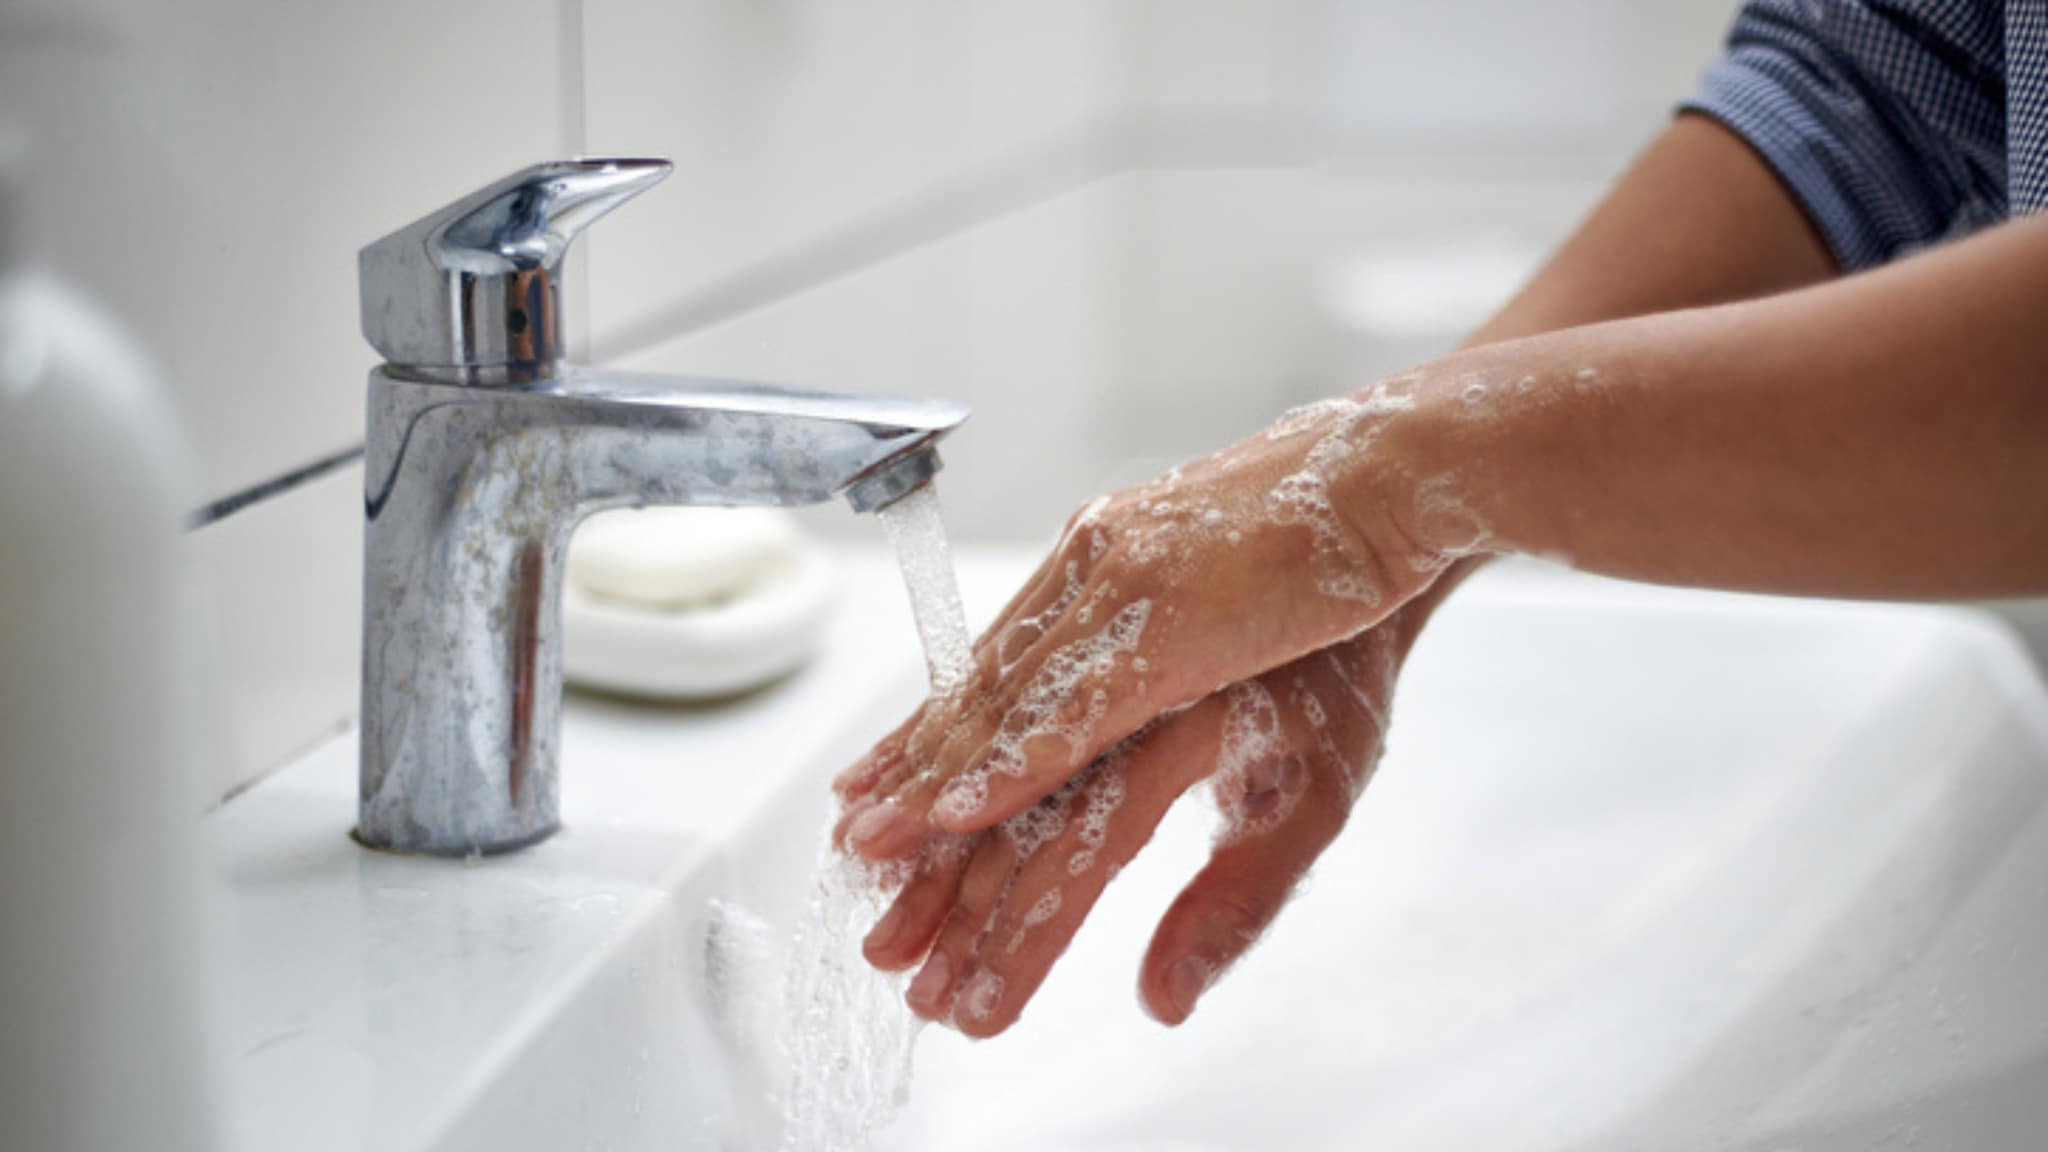 hands being washed in bathroom sink